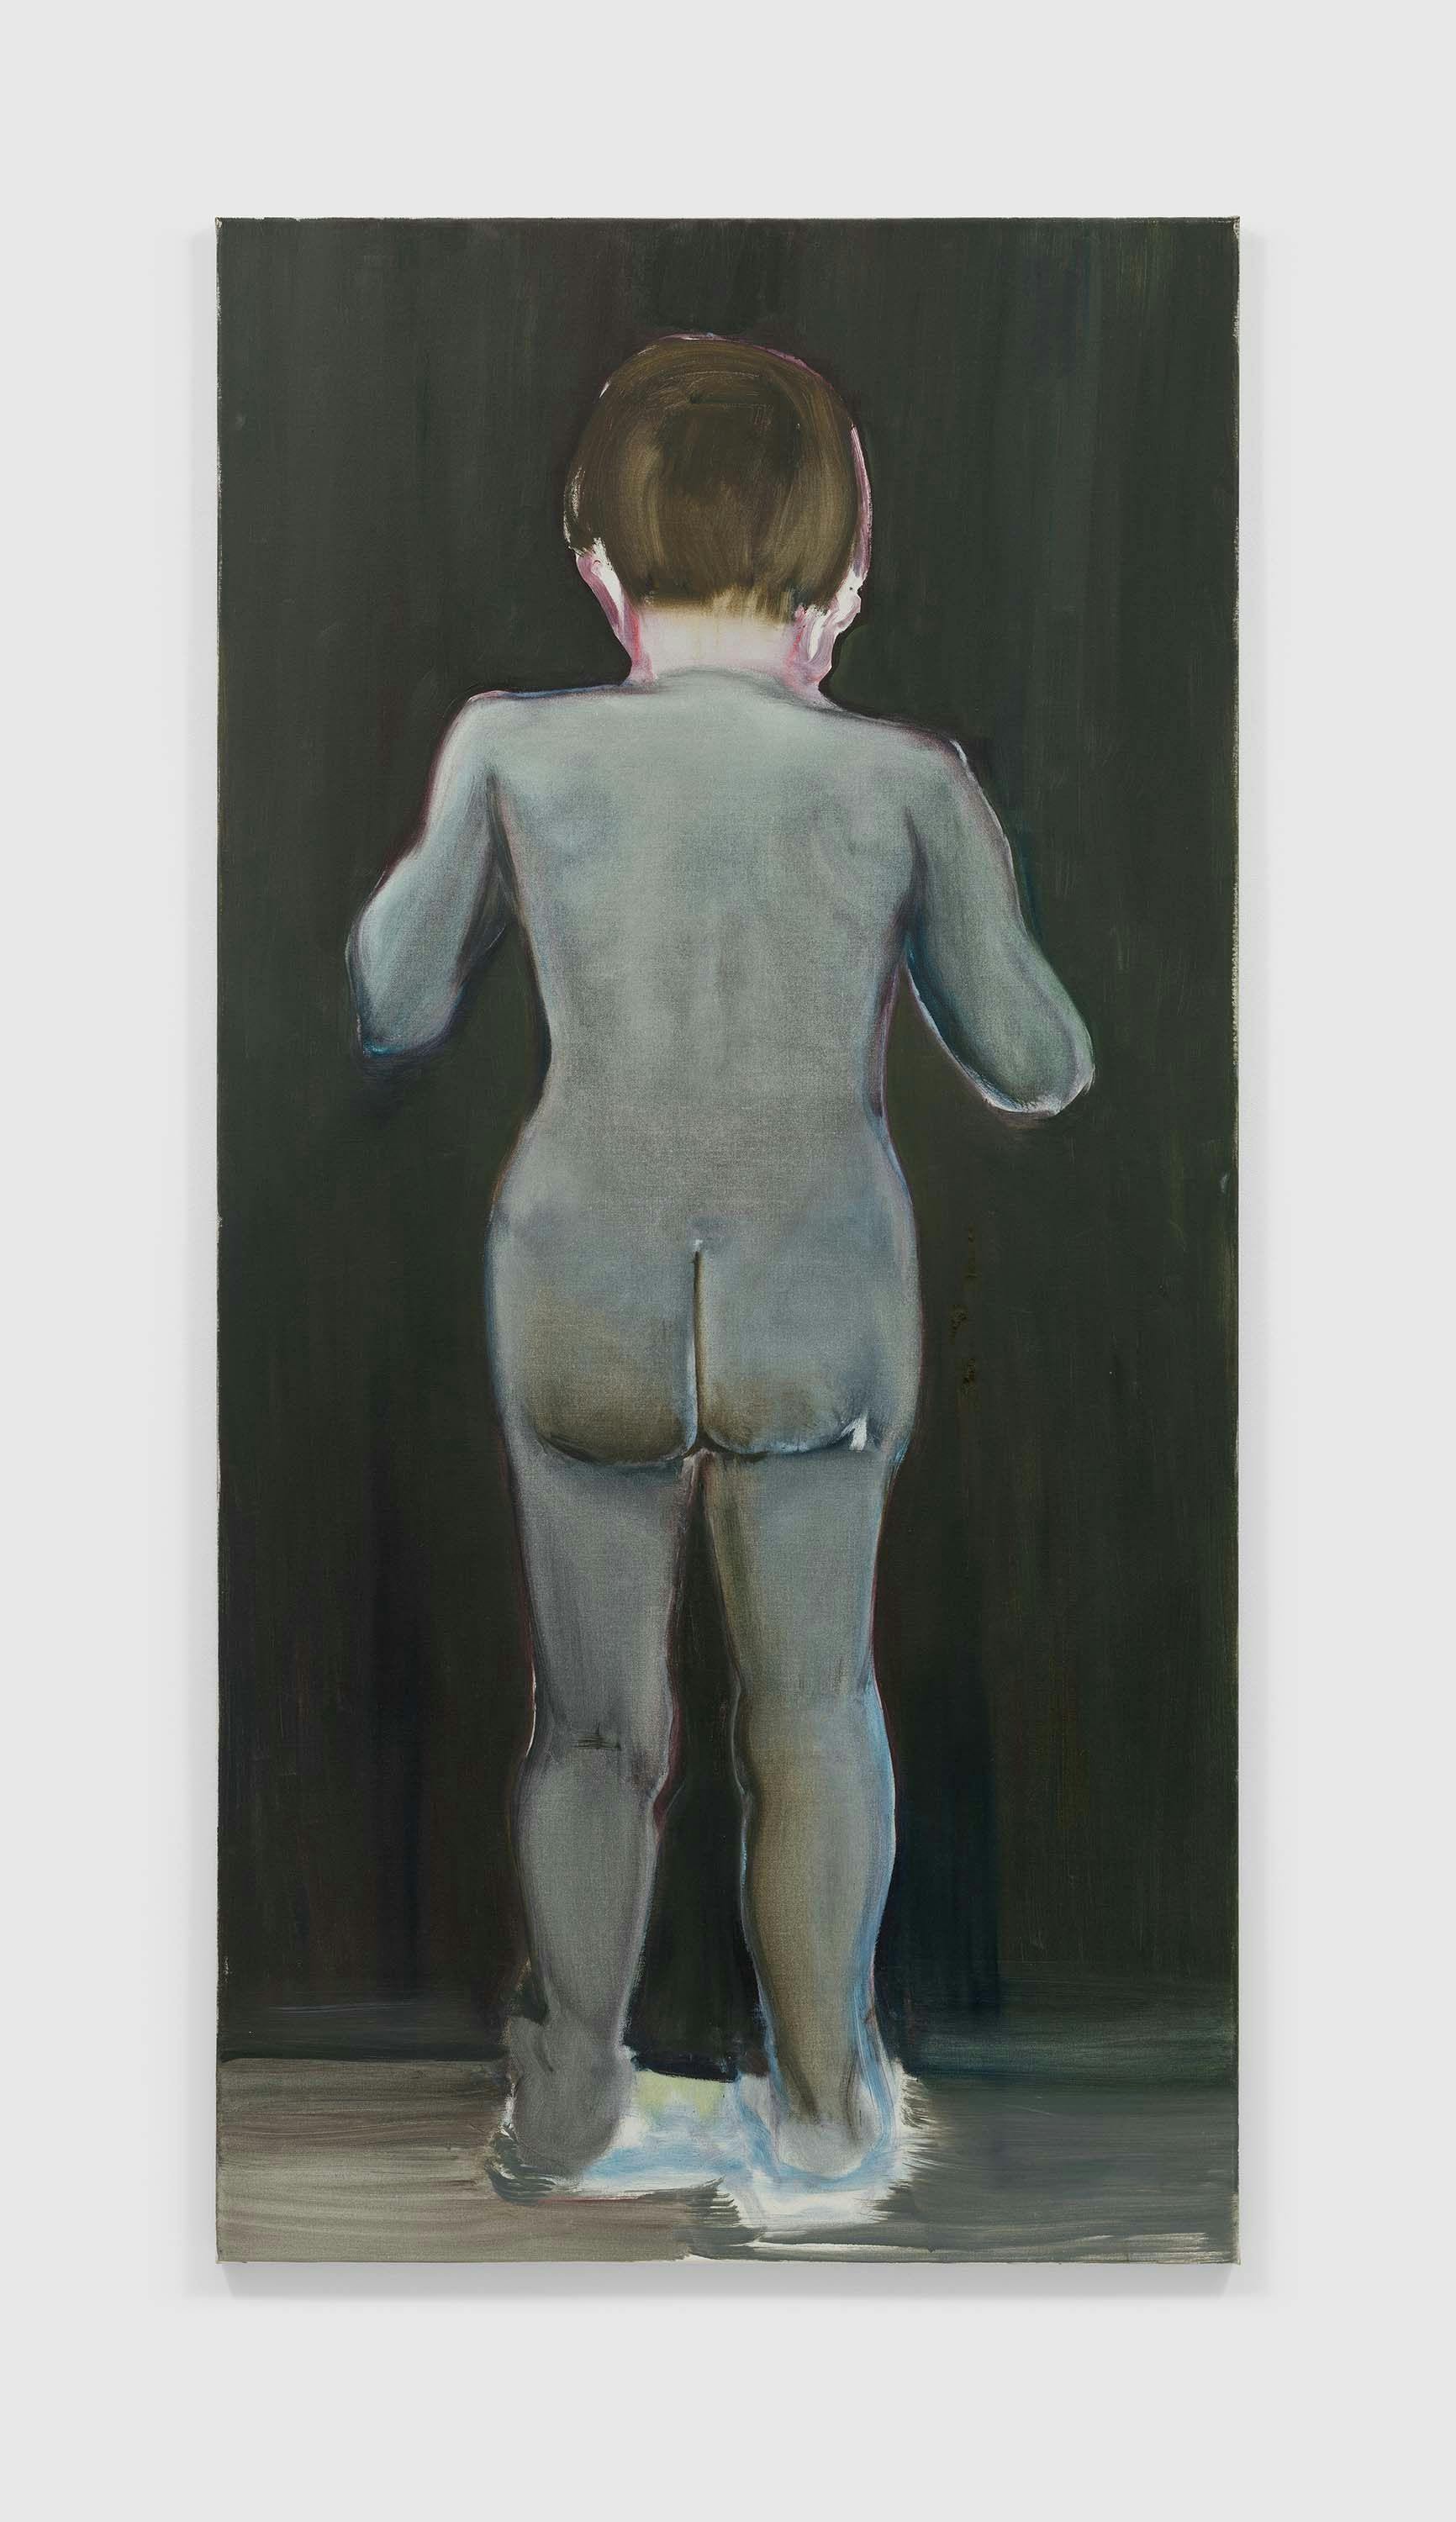 A painting by Marlene Dumas, titled The Secret, dated 1994.